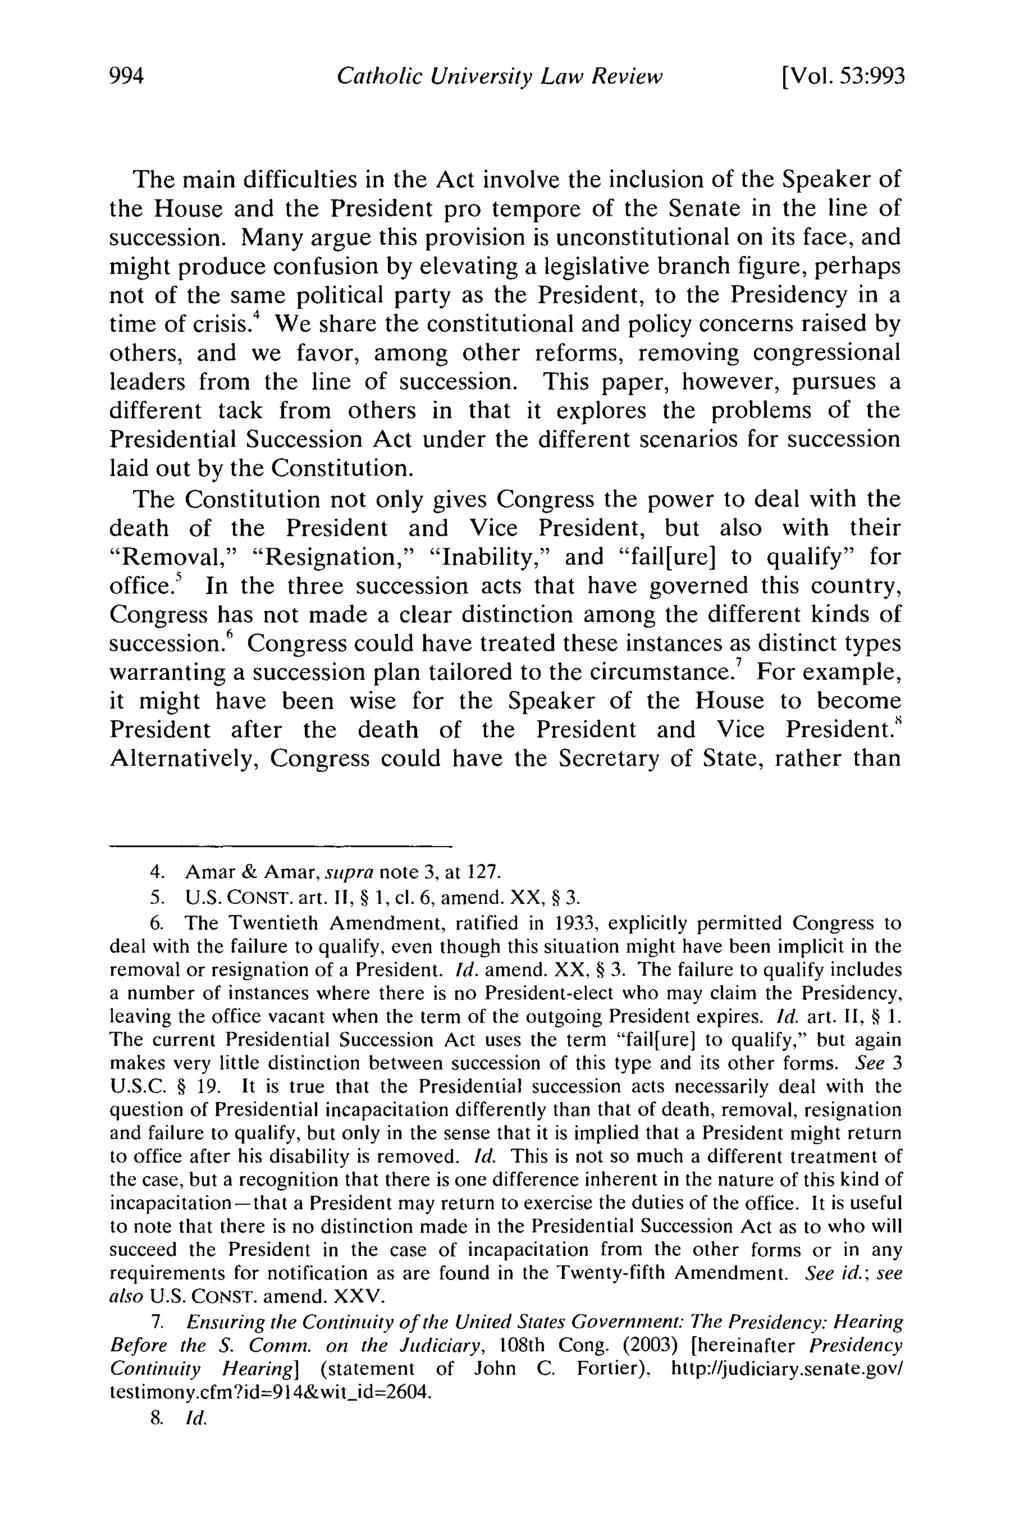 Catholic University Law Review [Vol. 53:993 The main difficulties in the Act involve the inclusion of the Speaker of the House and the President pro tempore of the Senate in the line of succession.